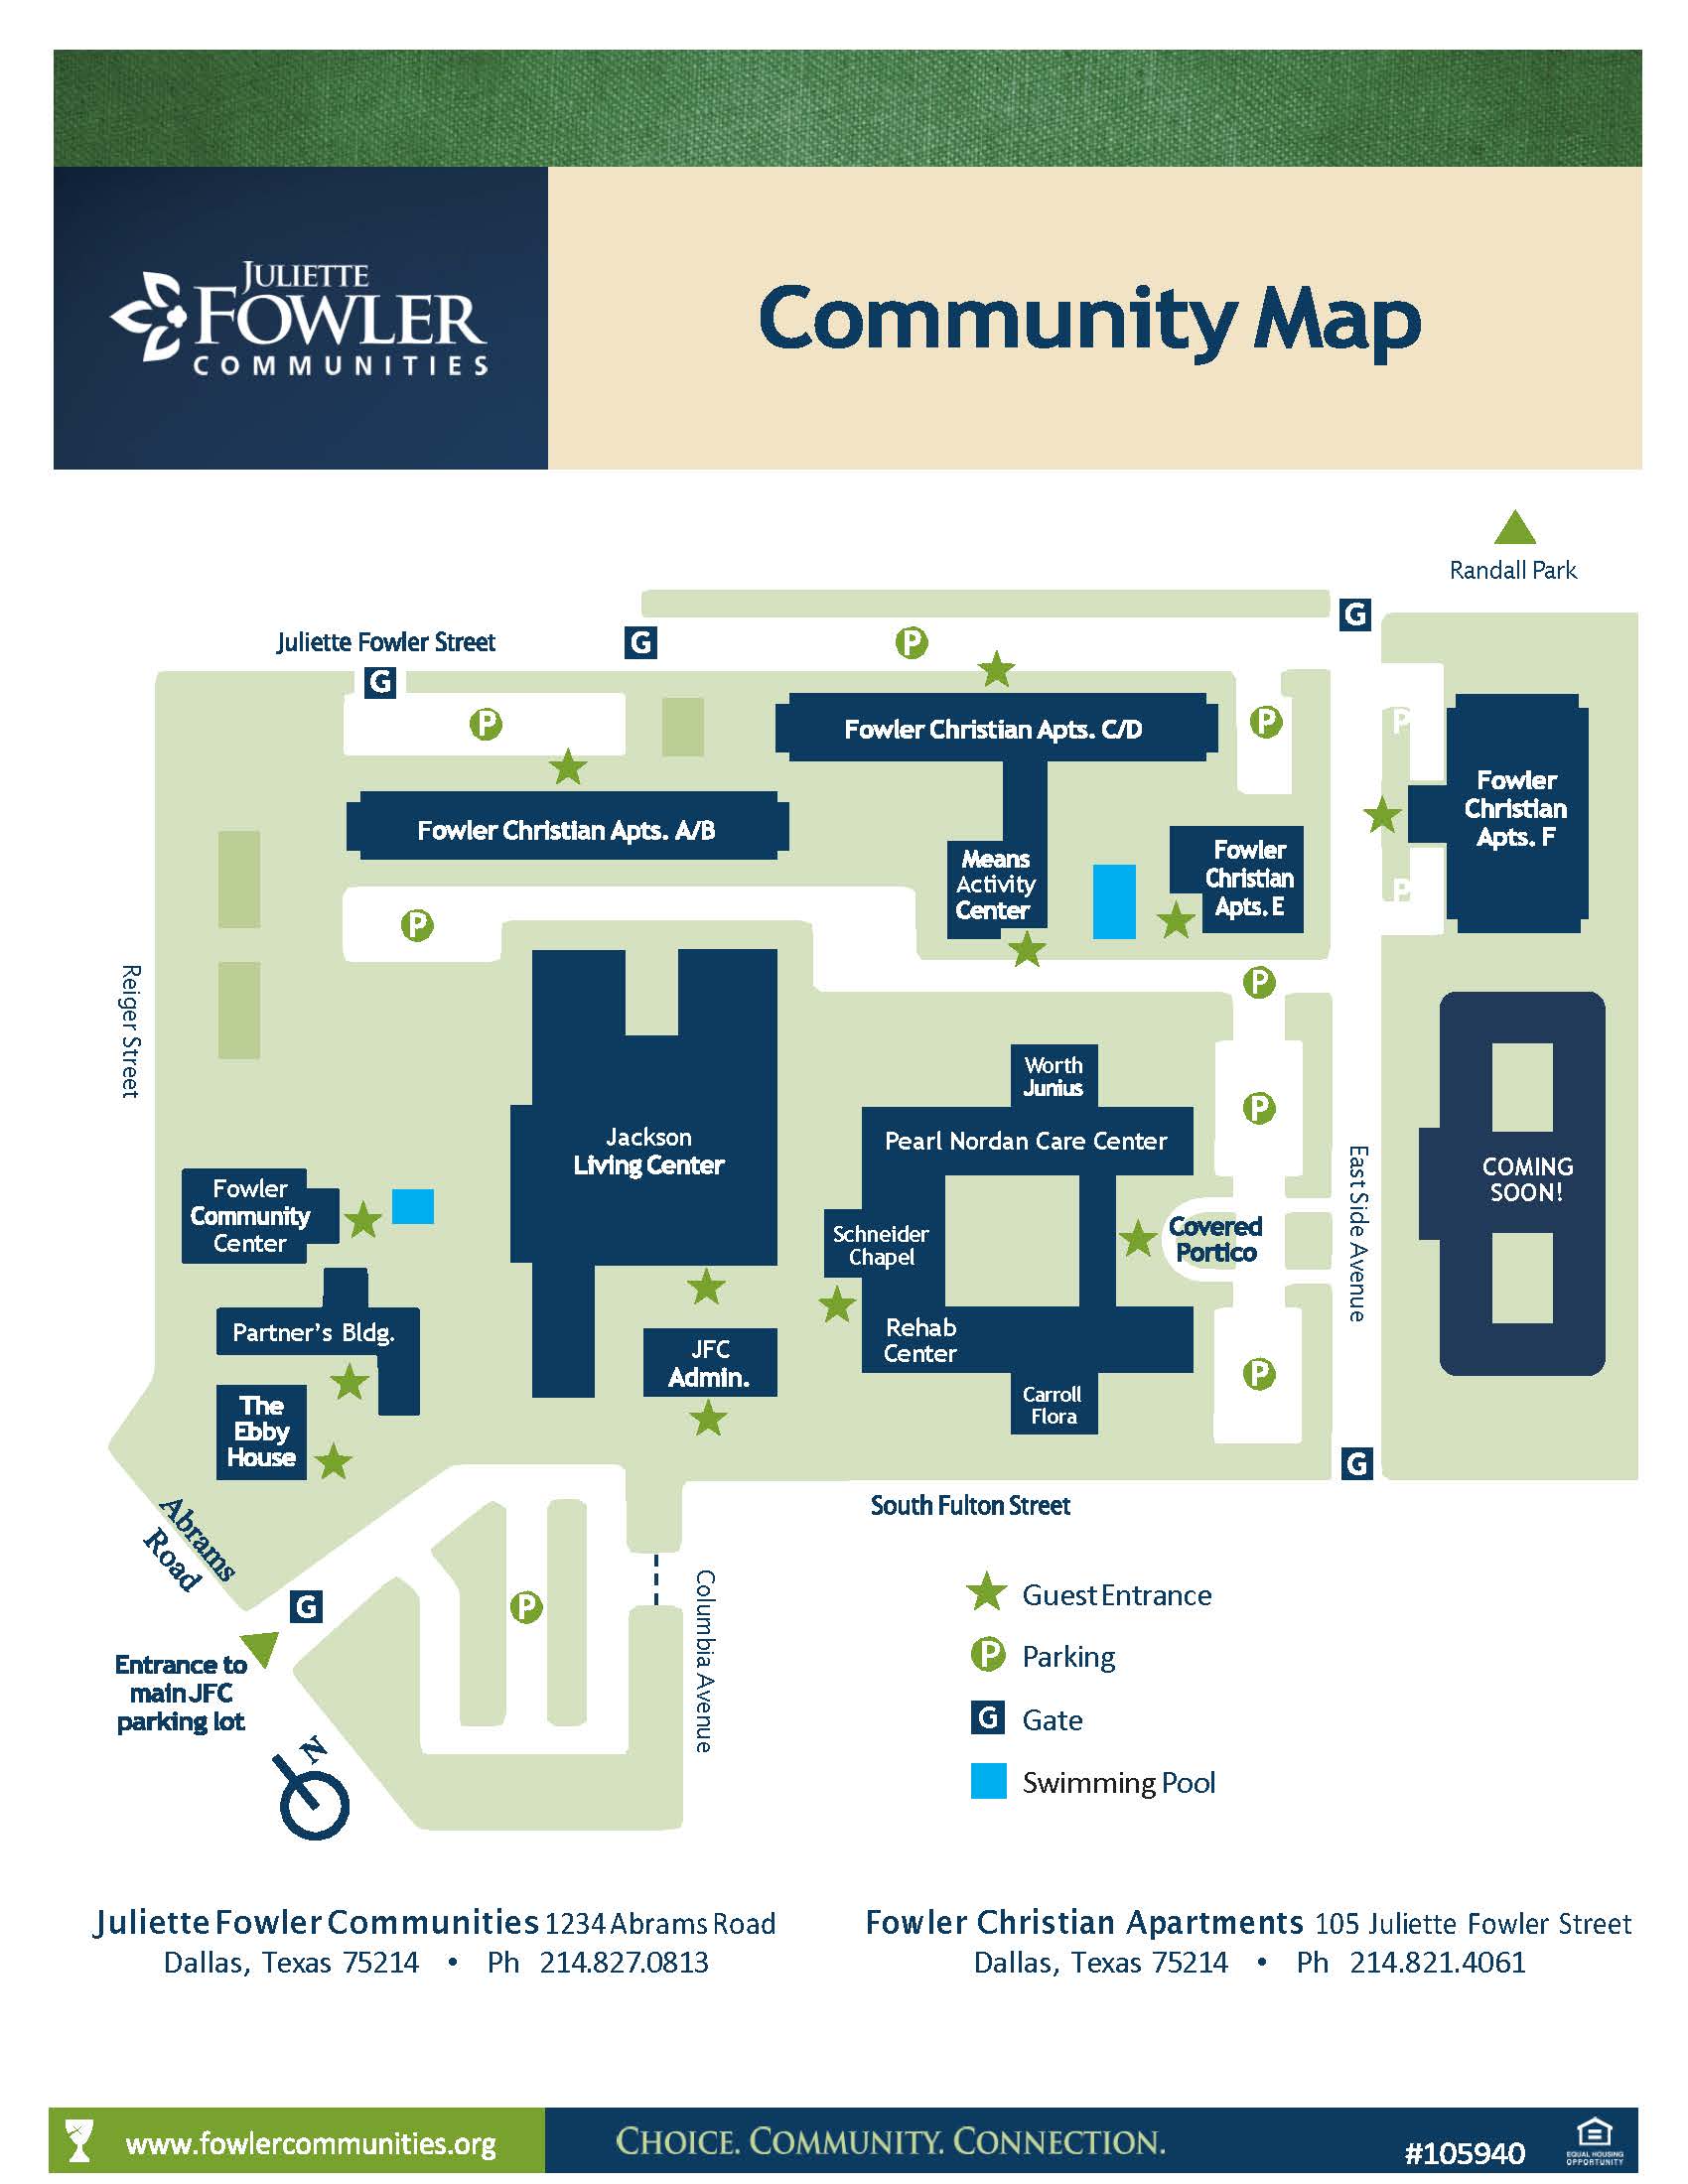 Download Campus Map Here